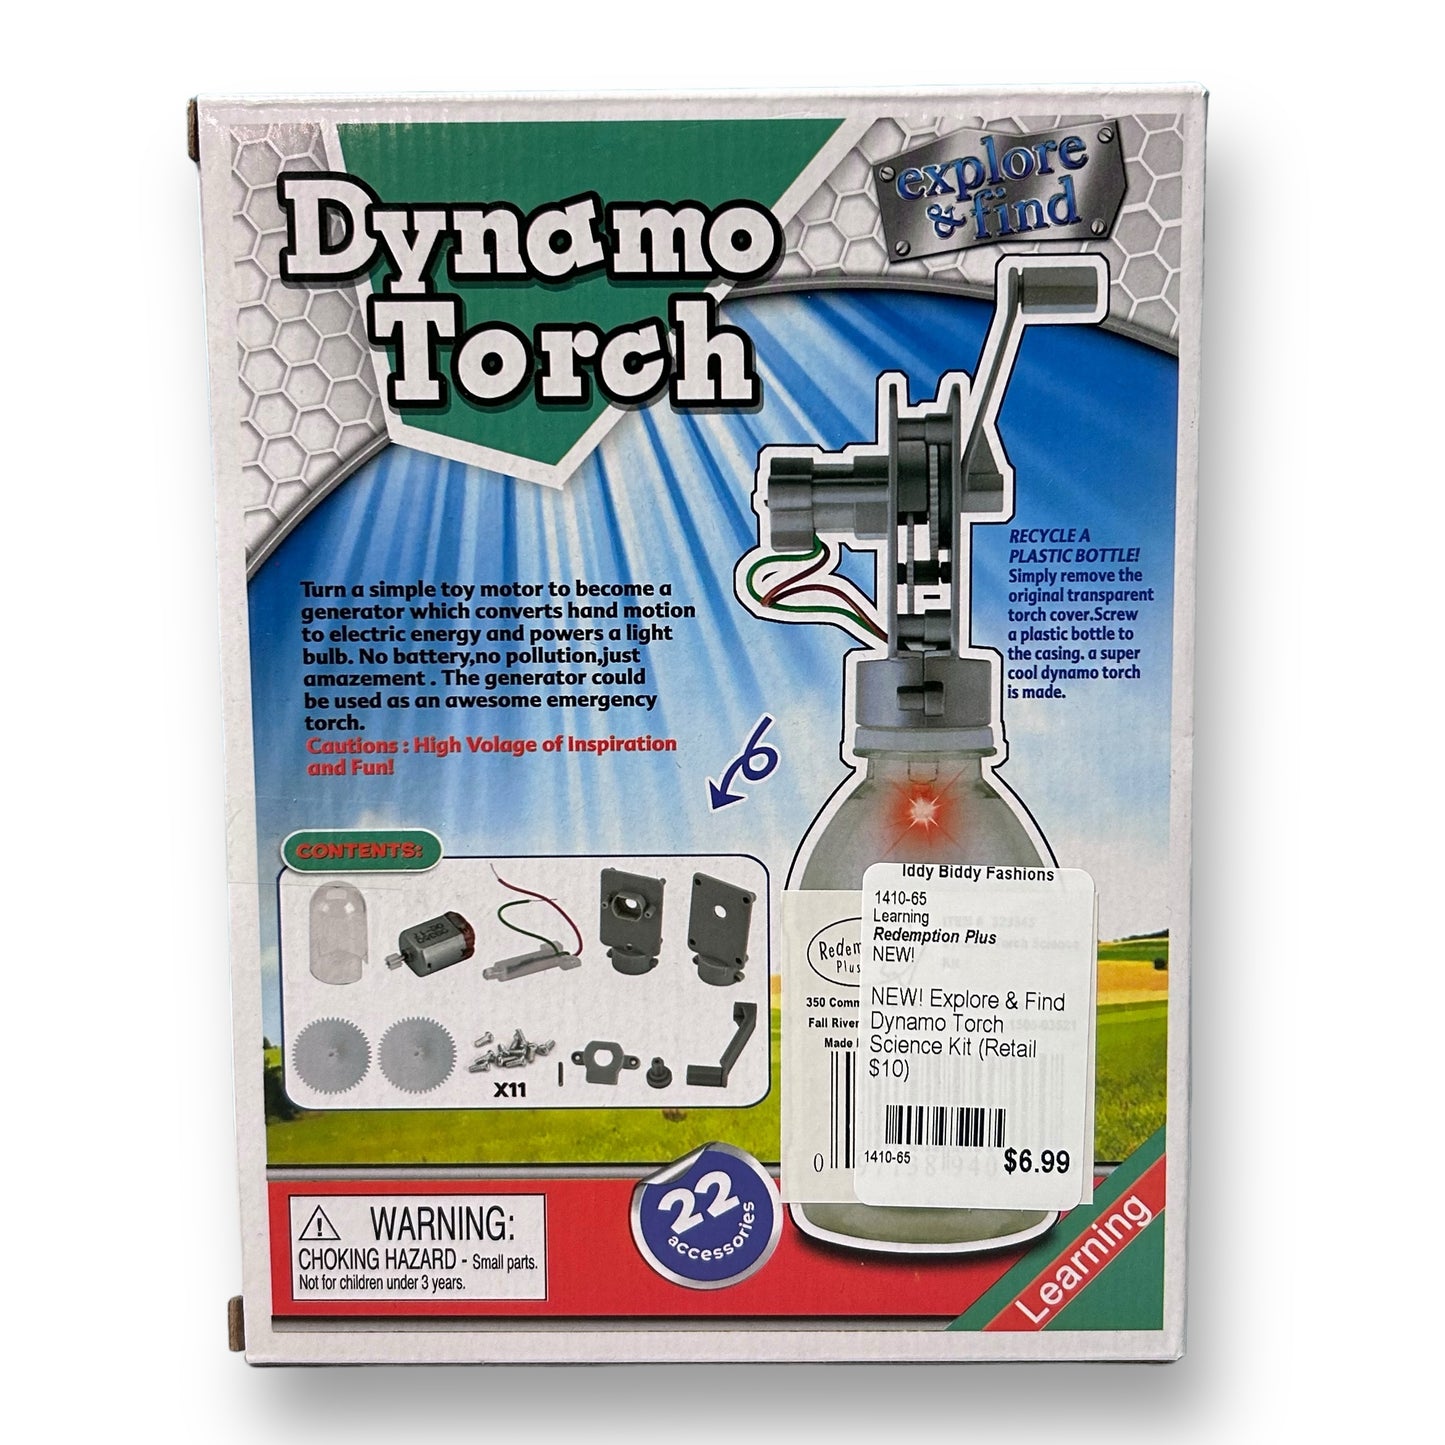 NEW! Explore & Find Dynamo Torch Science Kit